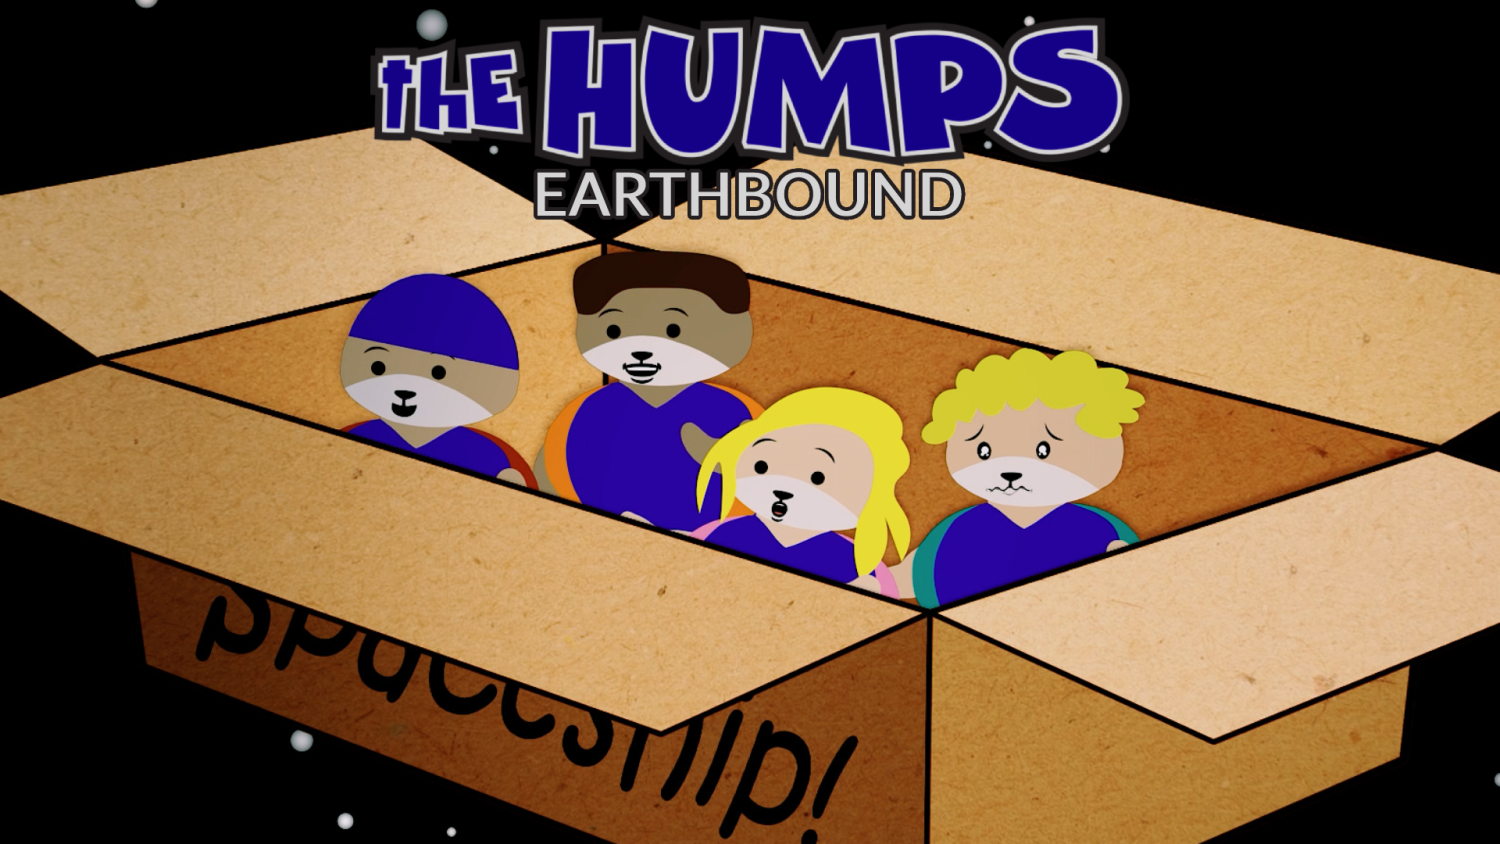 The Humps: Earthbound promo image